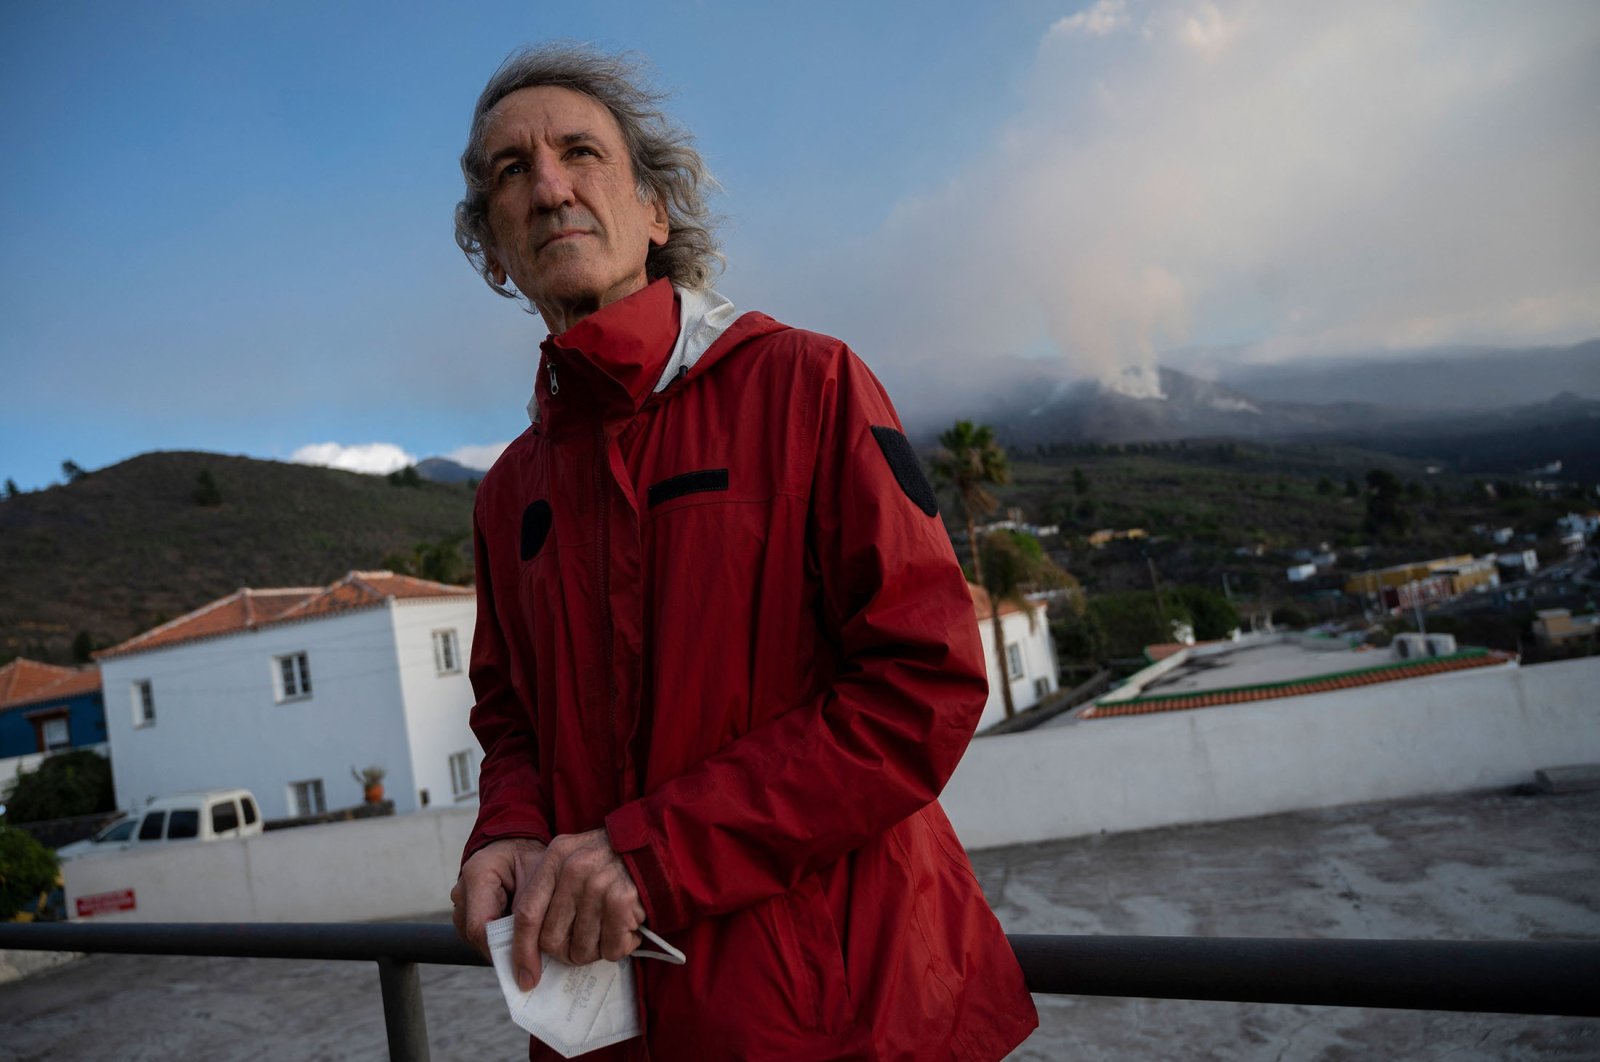 Spanish vulcanologist Vicente Soler poses for a photo, at El Paso on the Canary island of La Palma, Spain, Dec. 11, 2021. (AFP Photo)